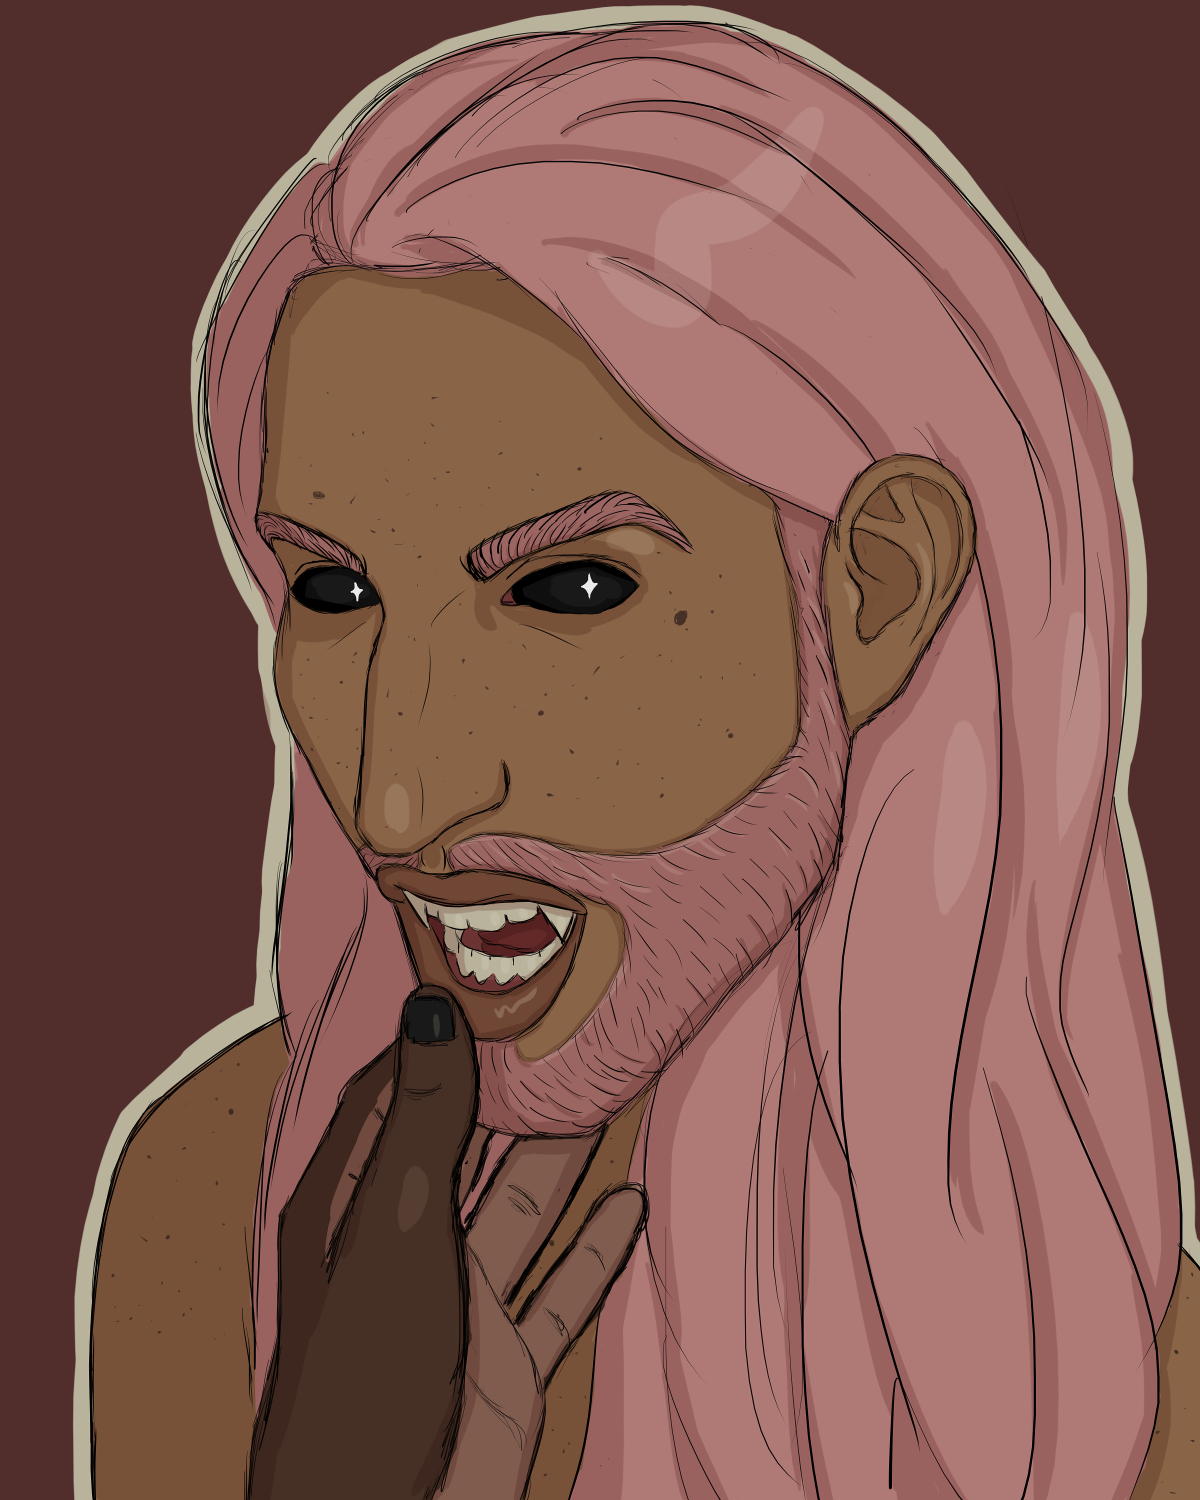 Messy digital art of a vampire with brown skin, freckles, fully black eyes with wicked little twinkles in them, long pink hair, pink brows, and a neat pink mustache and beard. His mouth is open, showing his fangs. Someone reaches from off screen, using their thumb to pull down the vampire's lower lip, other fingers under his chin.